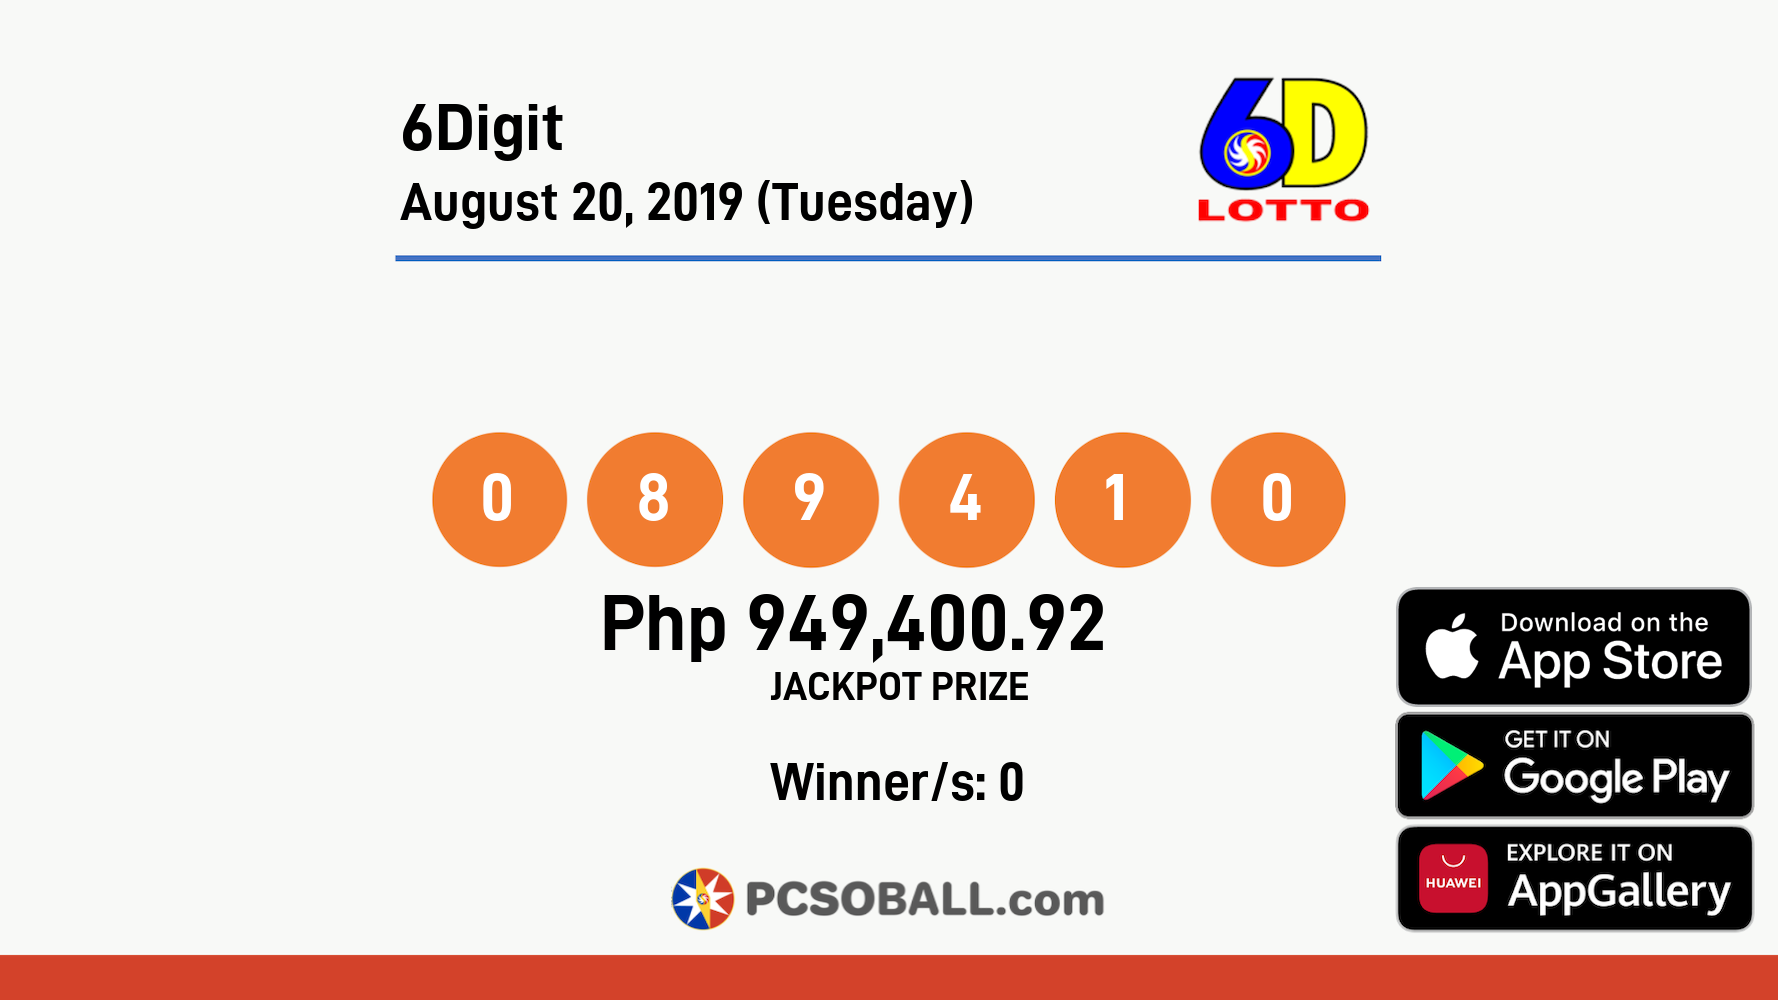 6Digit August 20, 2019 (Tuesday) Result